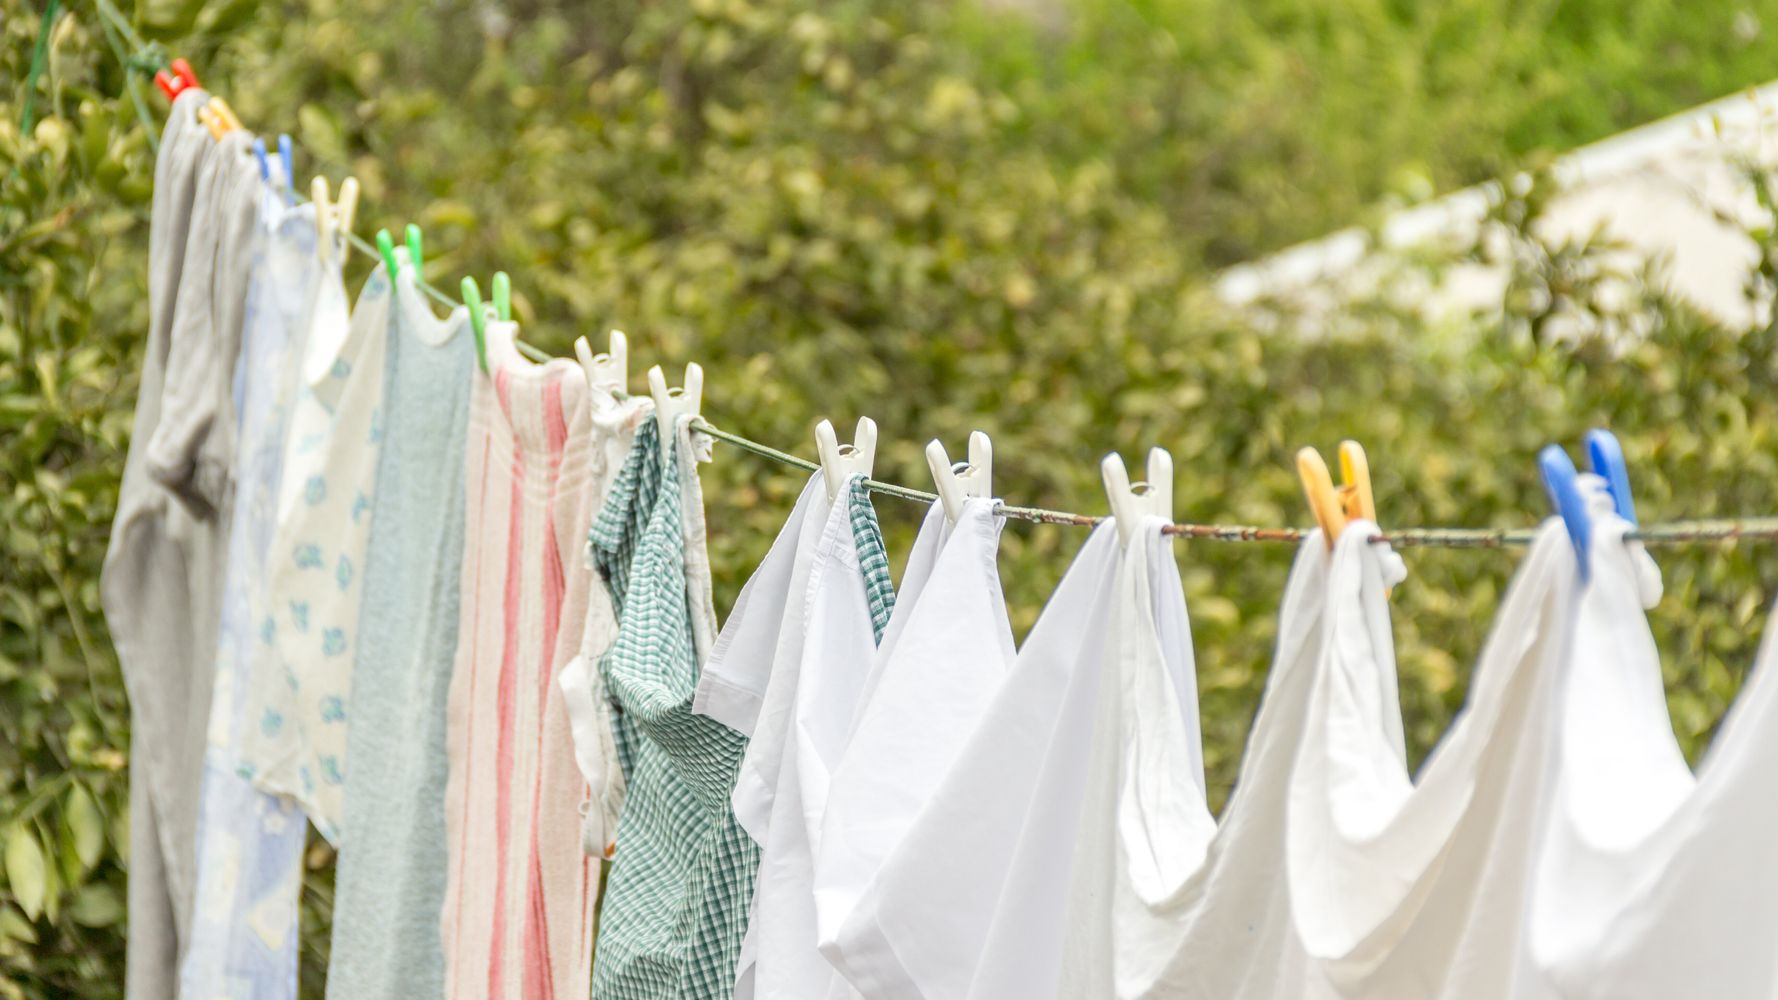 Bathroom Essentials to Wash More Often – Laundry Tips